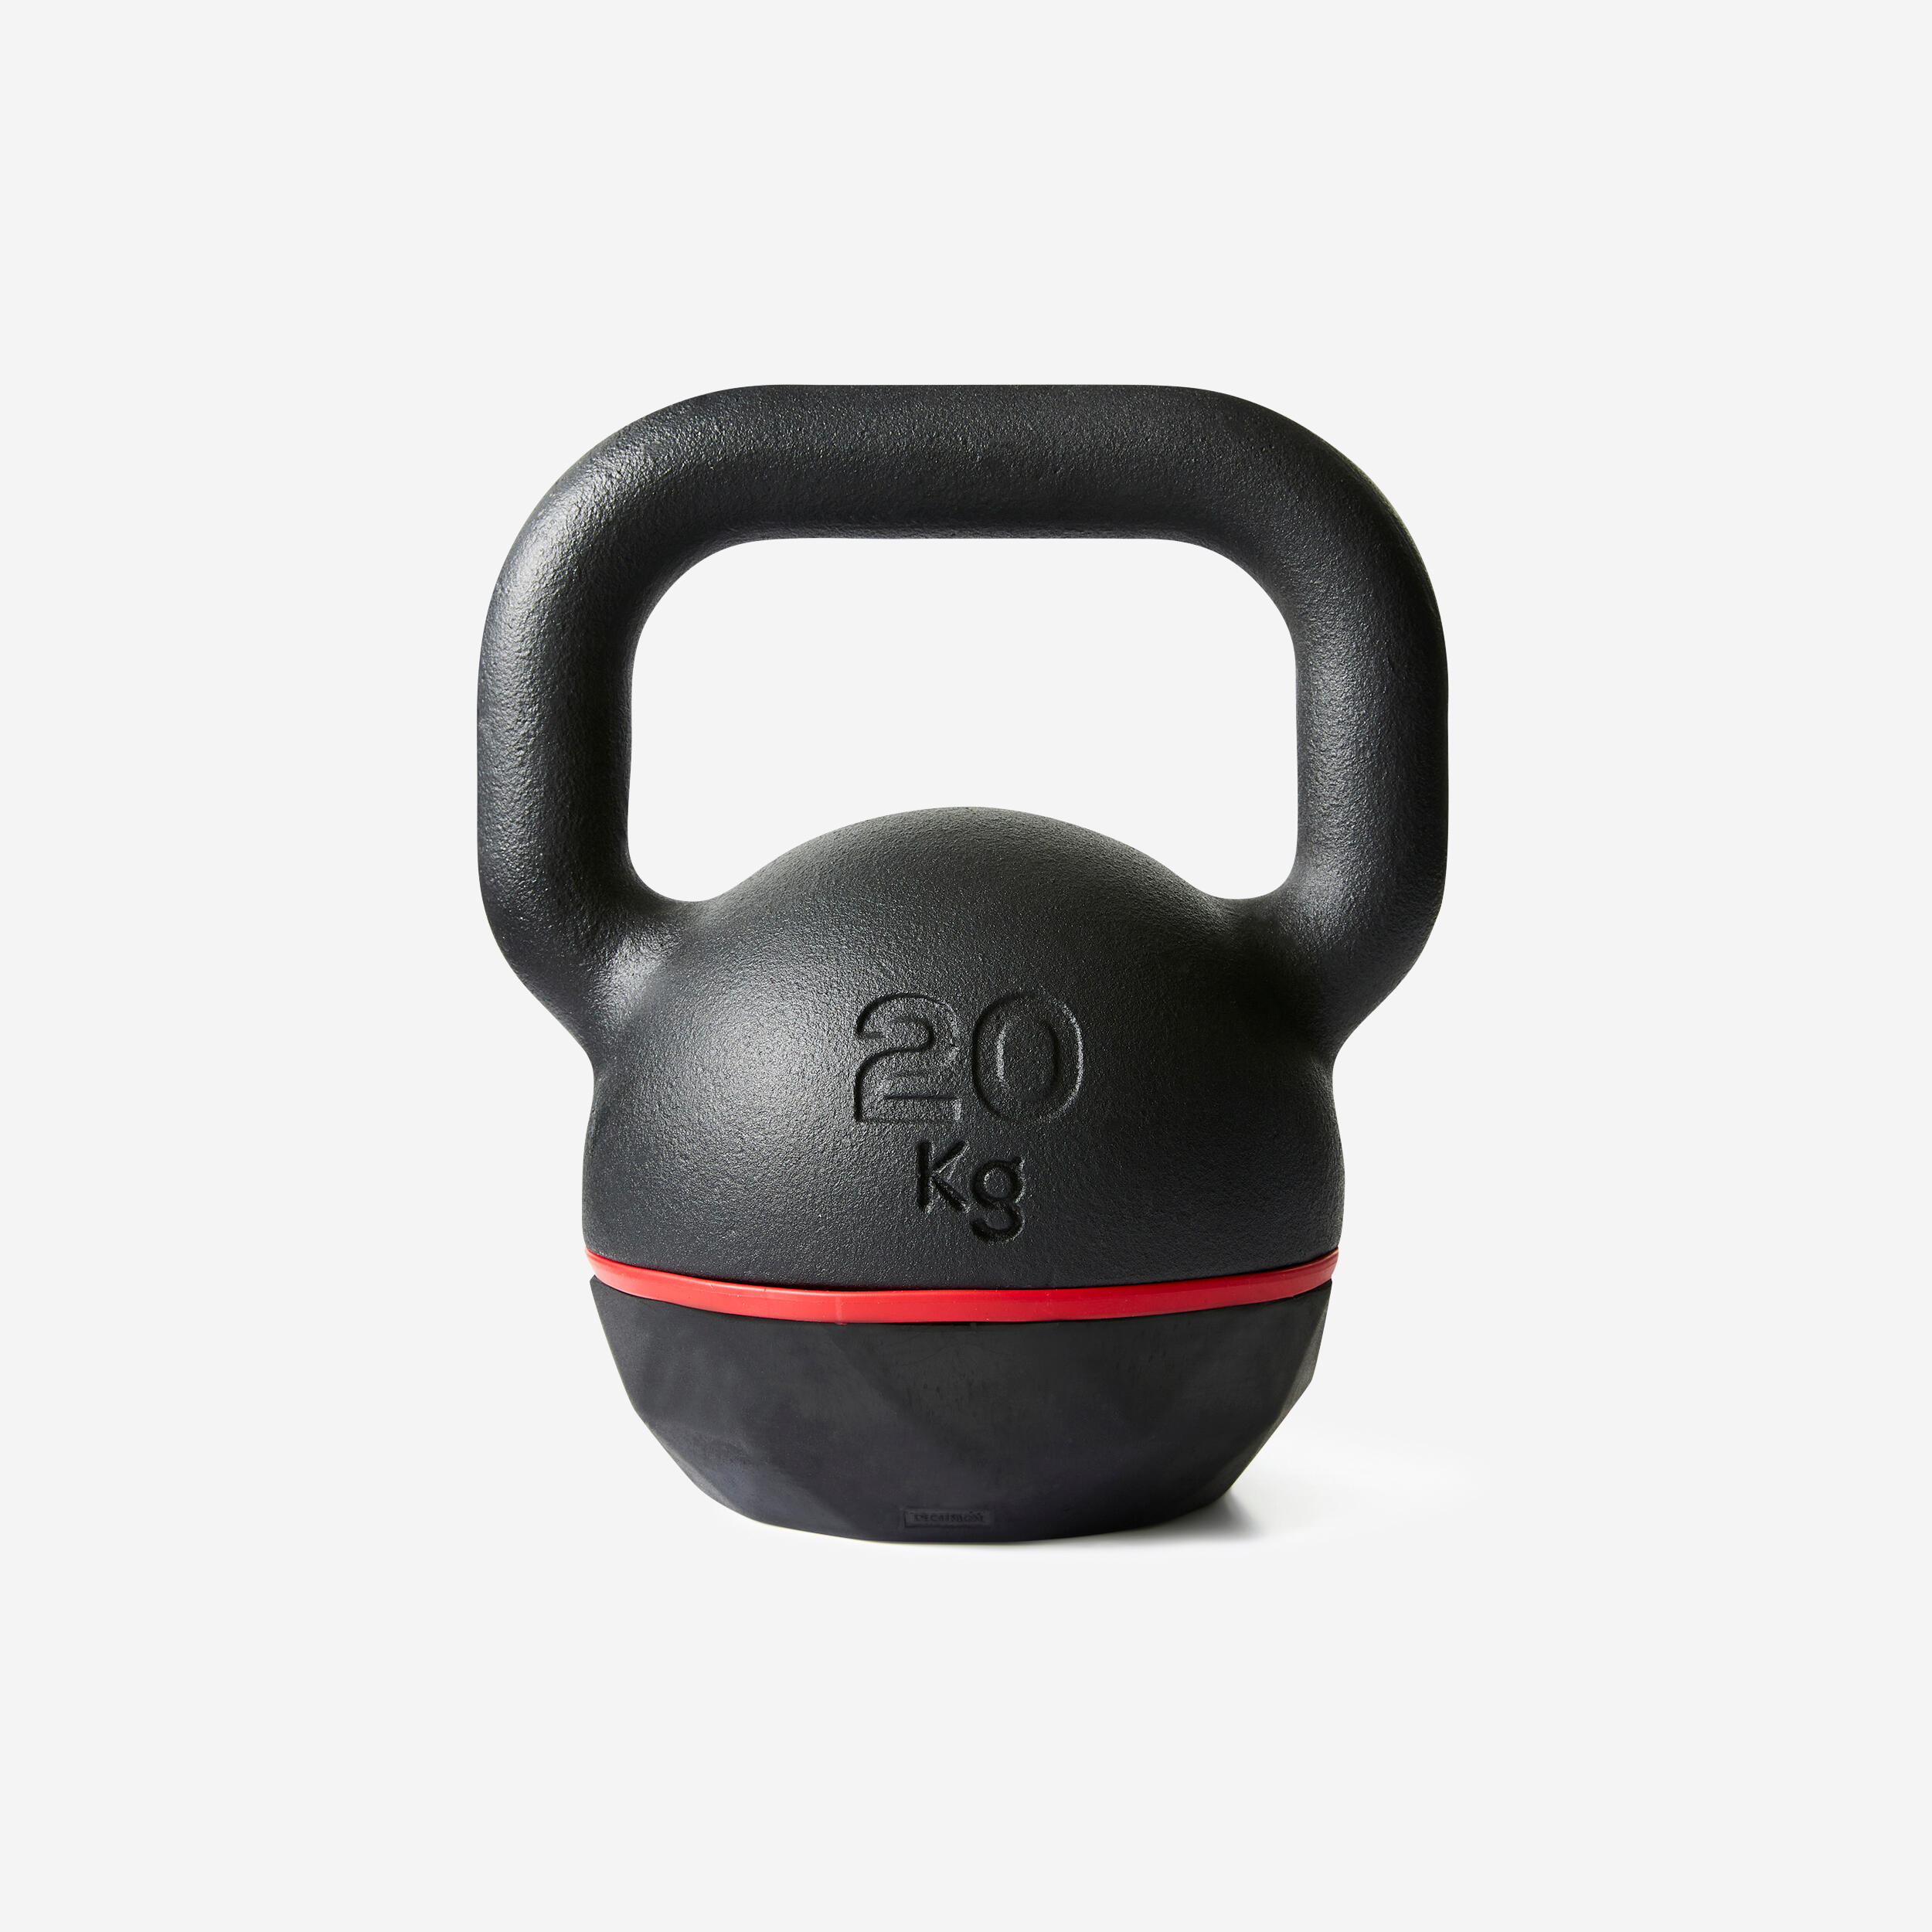 Cast Iron Kettlebell with Rubber Base - 20 kg 1/5